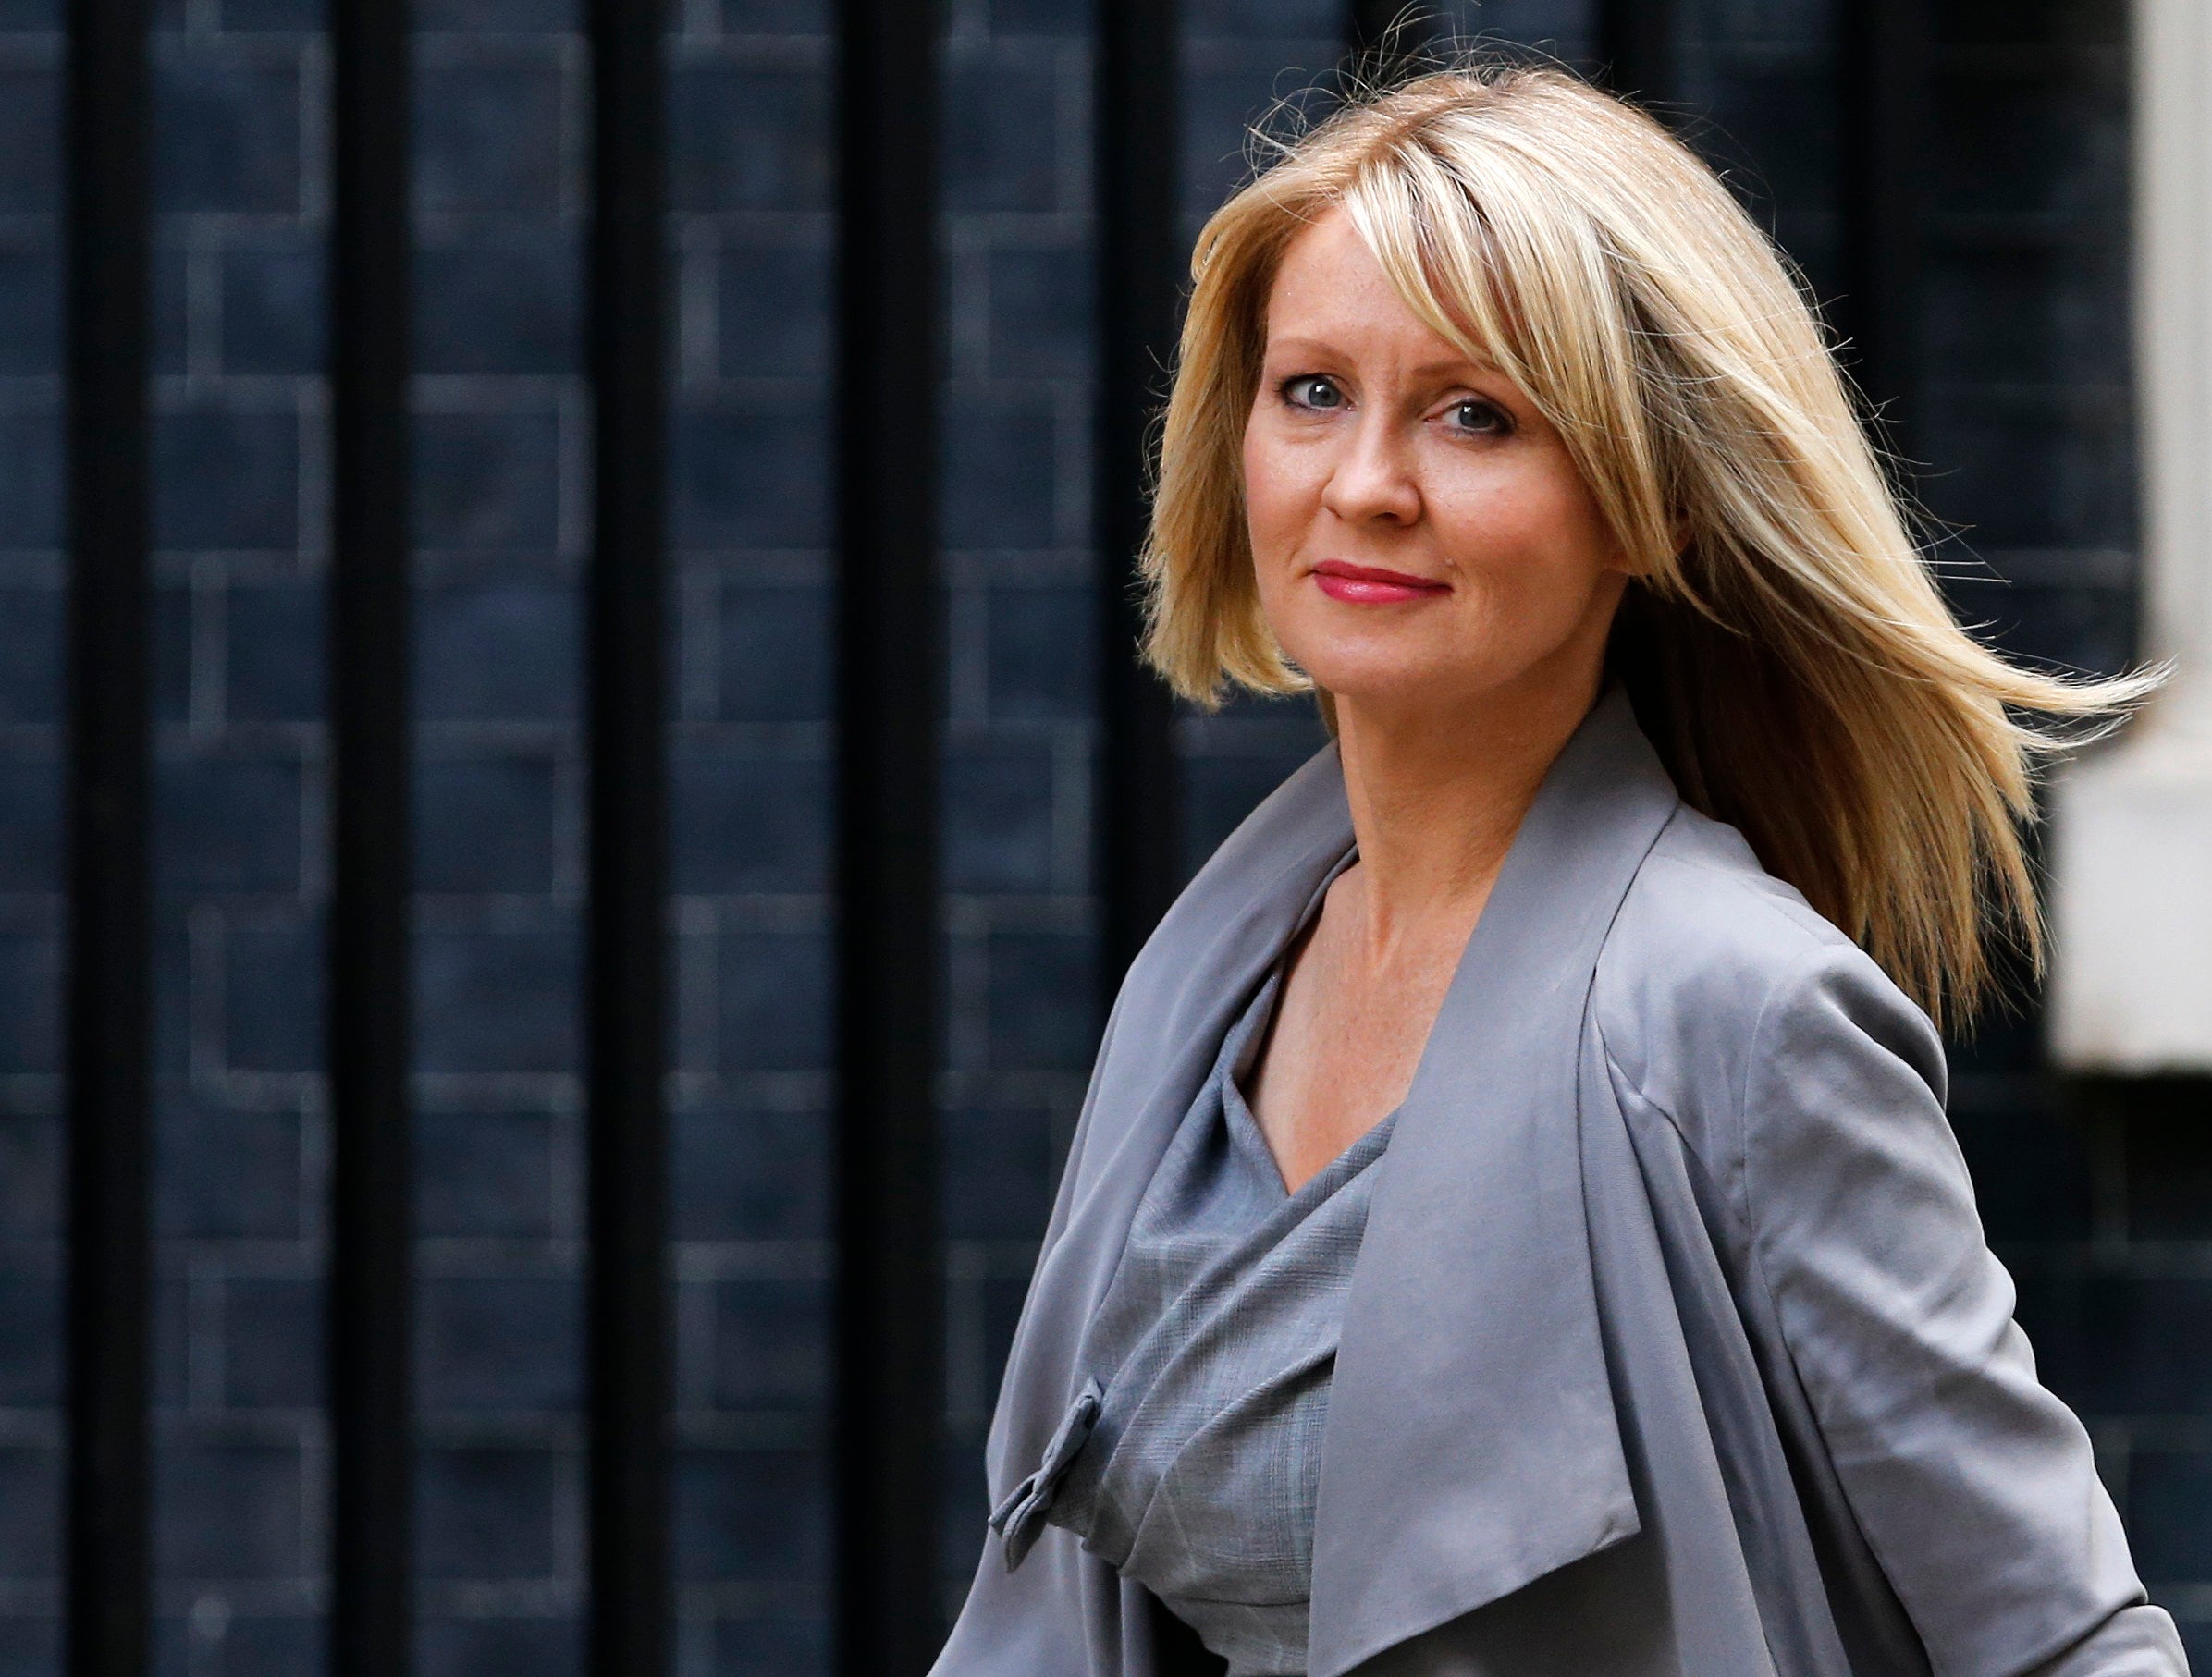 Esther McVey becomes deputy chief whip after resignation of Defence Secretary Michael Fallon